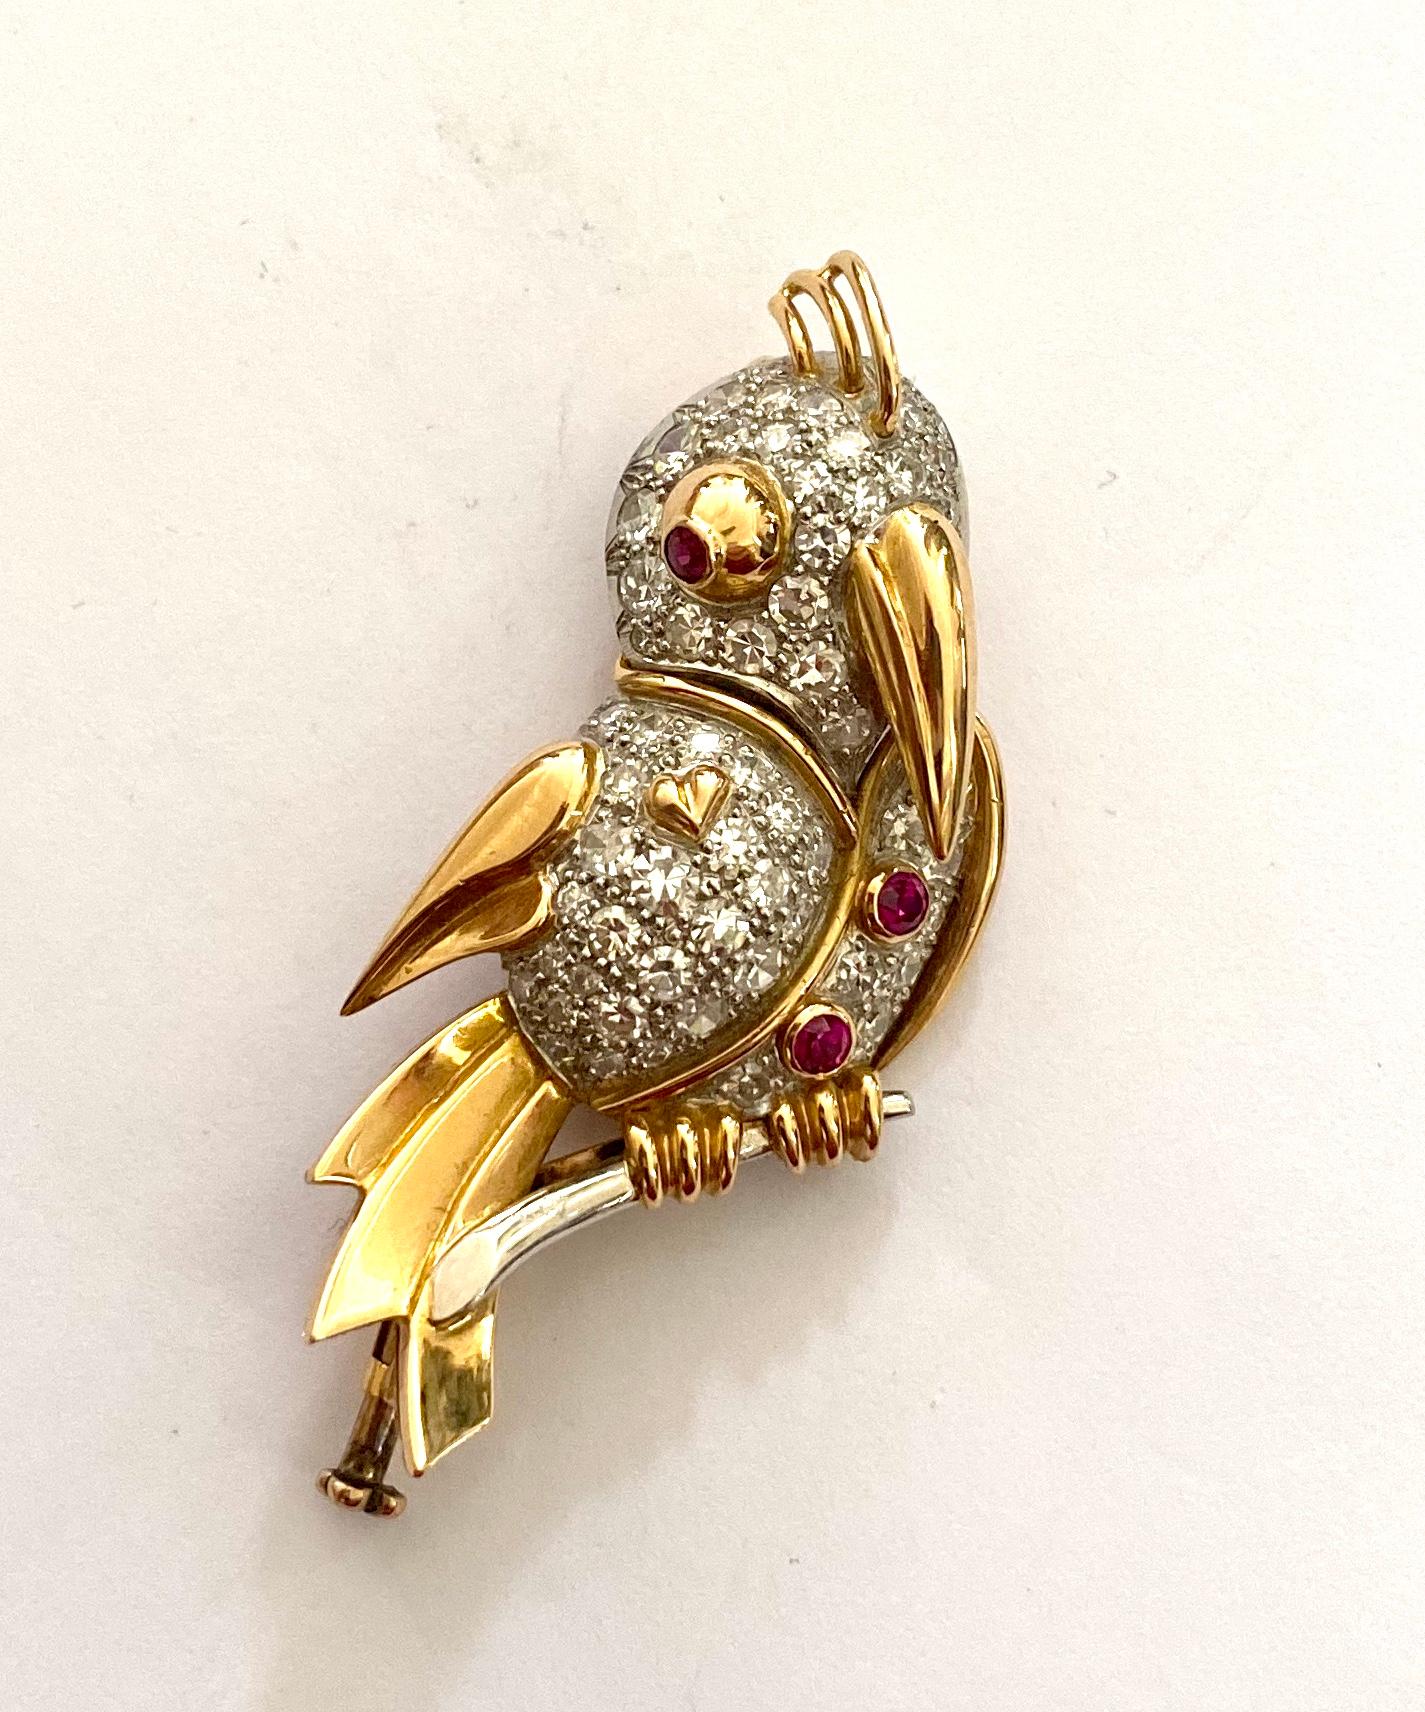 This brooch is a beautiful example of the 